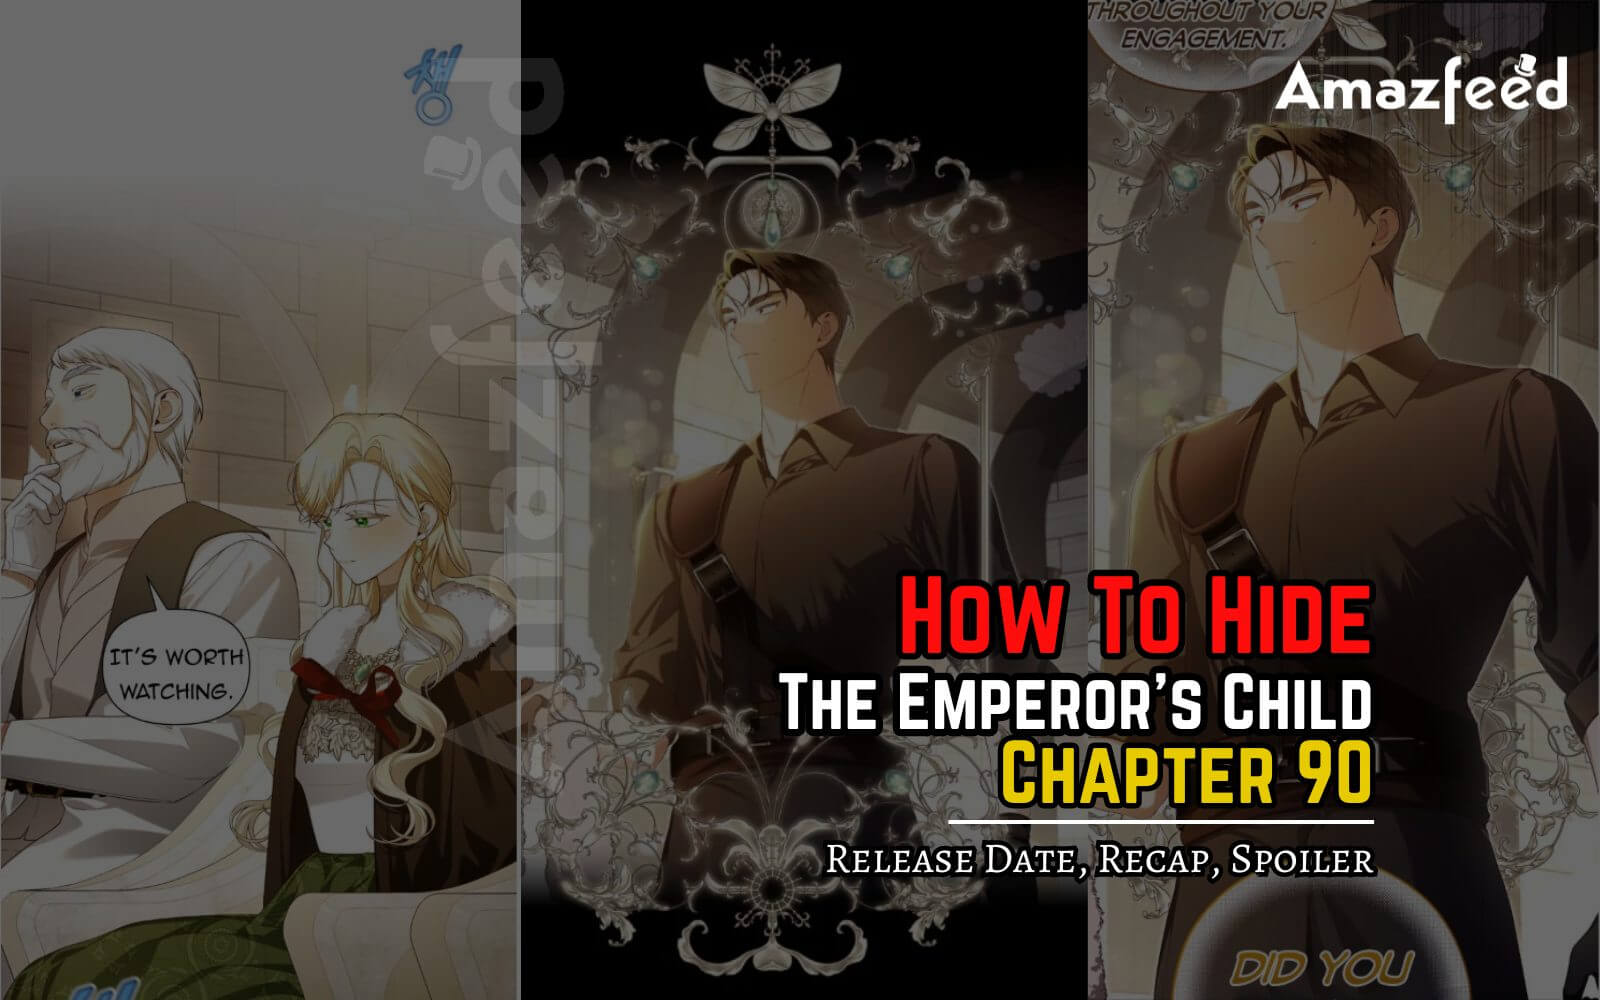 How To Hide The Emperor’s Child Chapter 90 Release Date